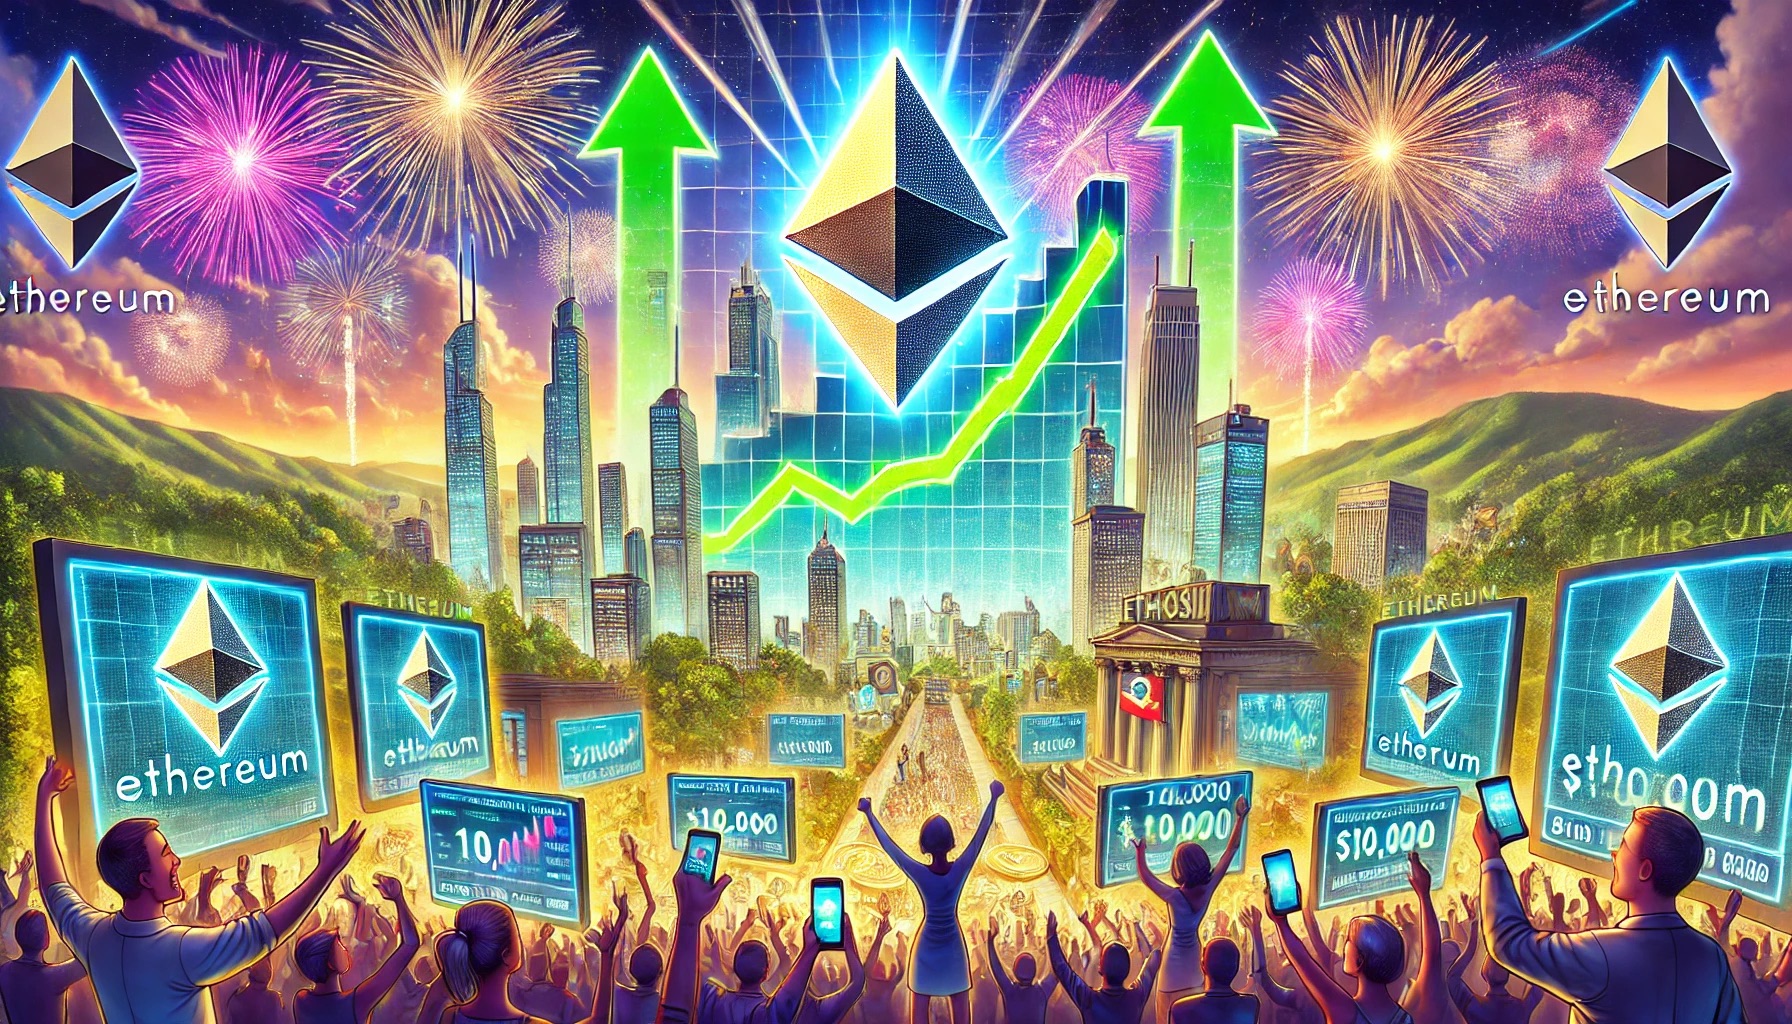 Ethereum Price To Hit $10,000, Just The Way The Chips Have Fallen, Analyst Says